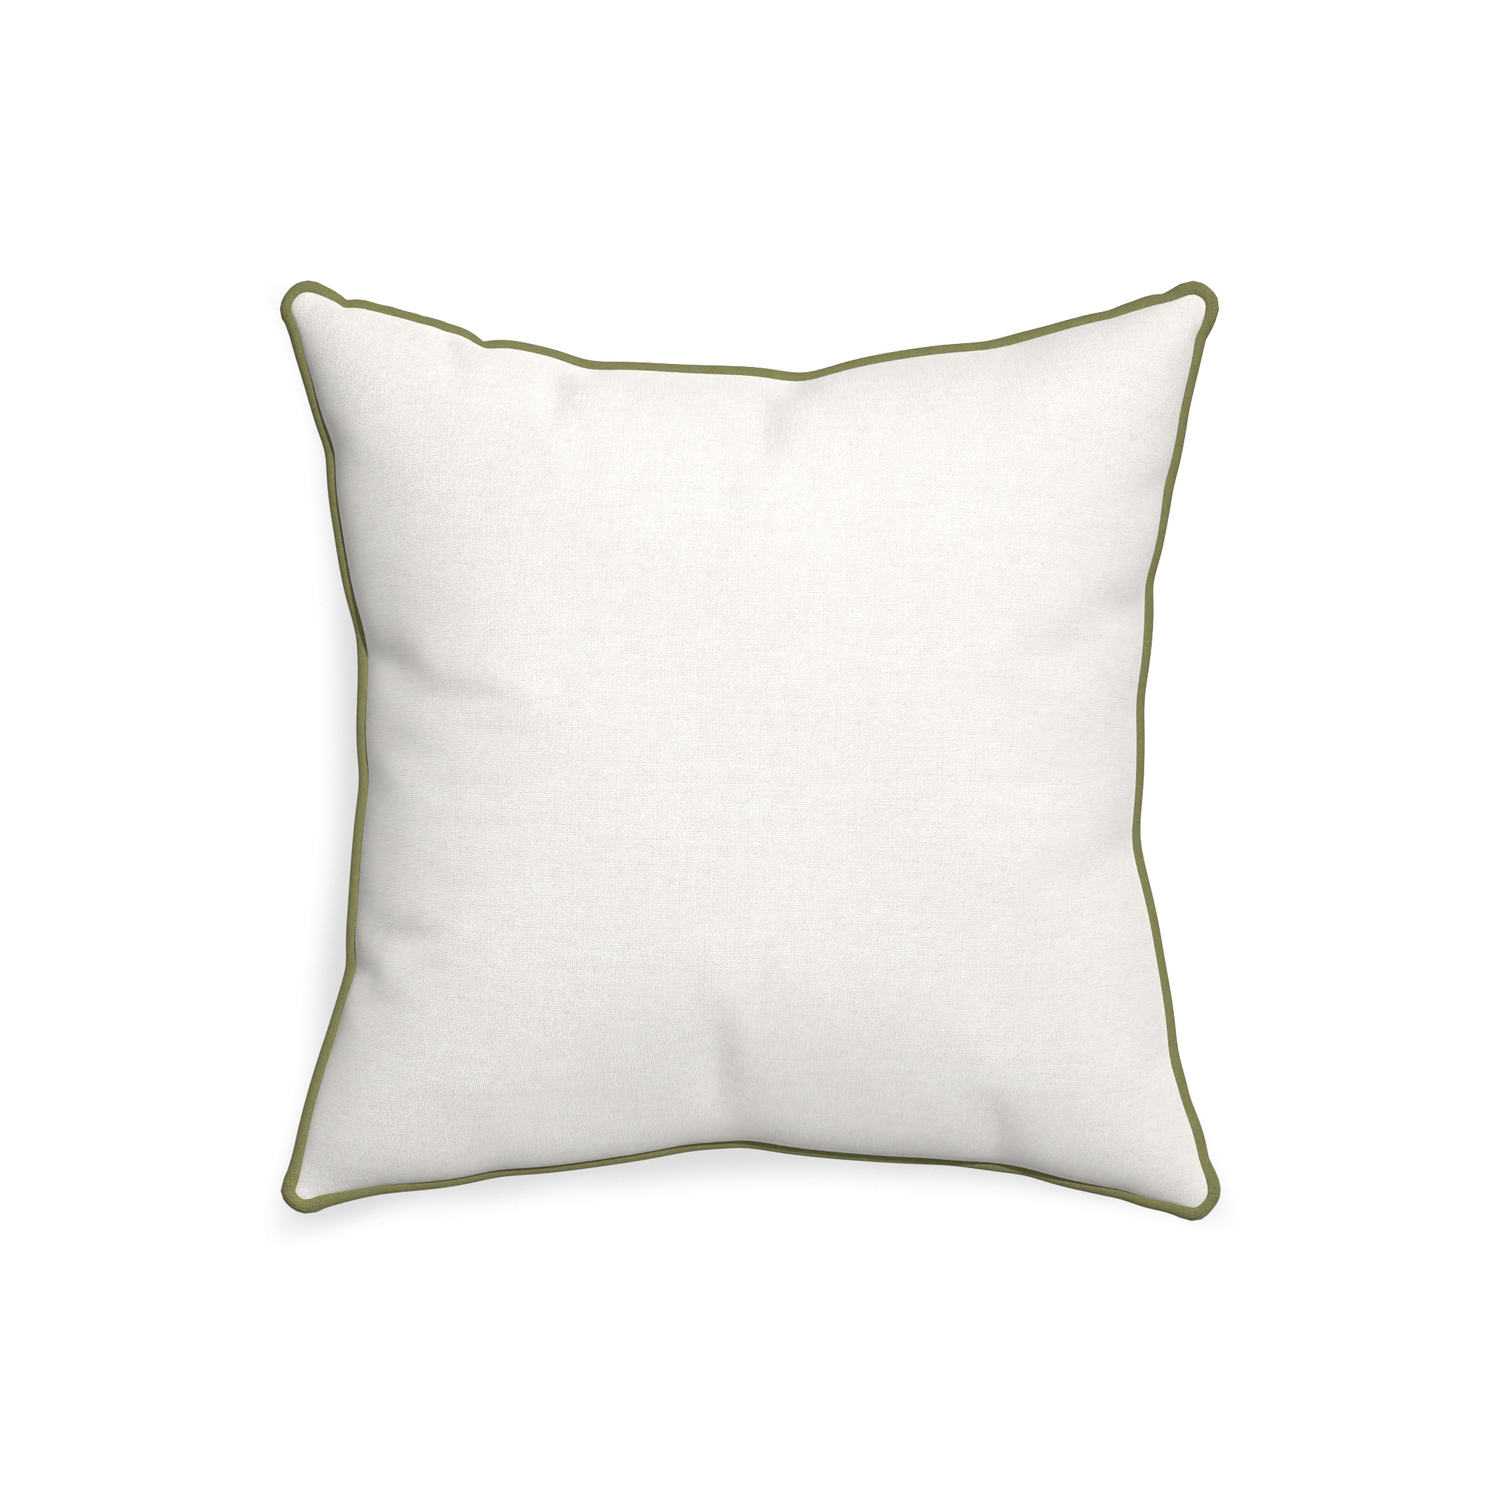 square natural white pillow with moss green piping